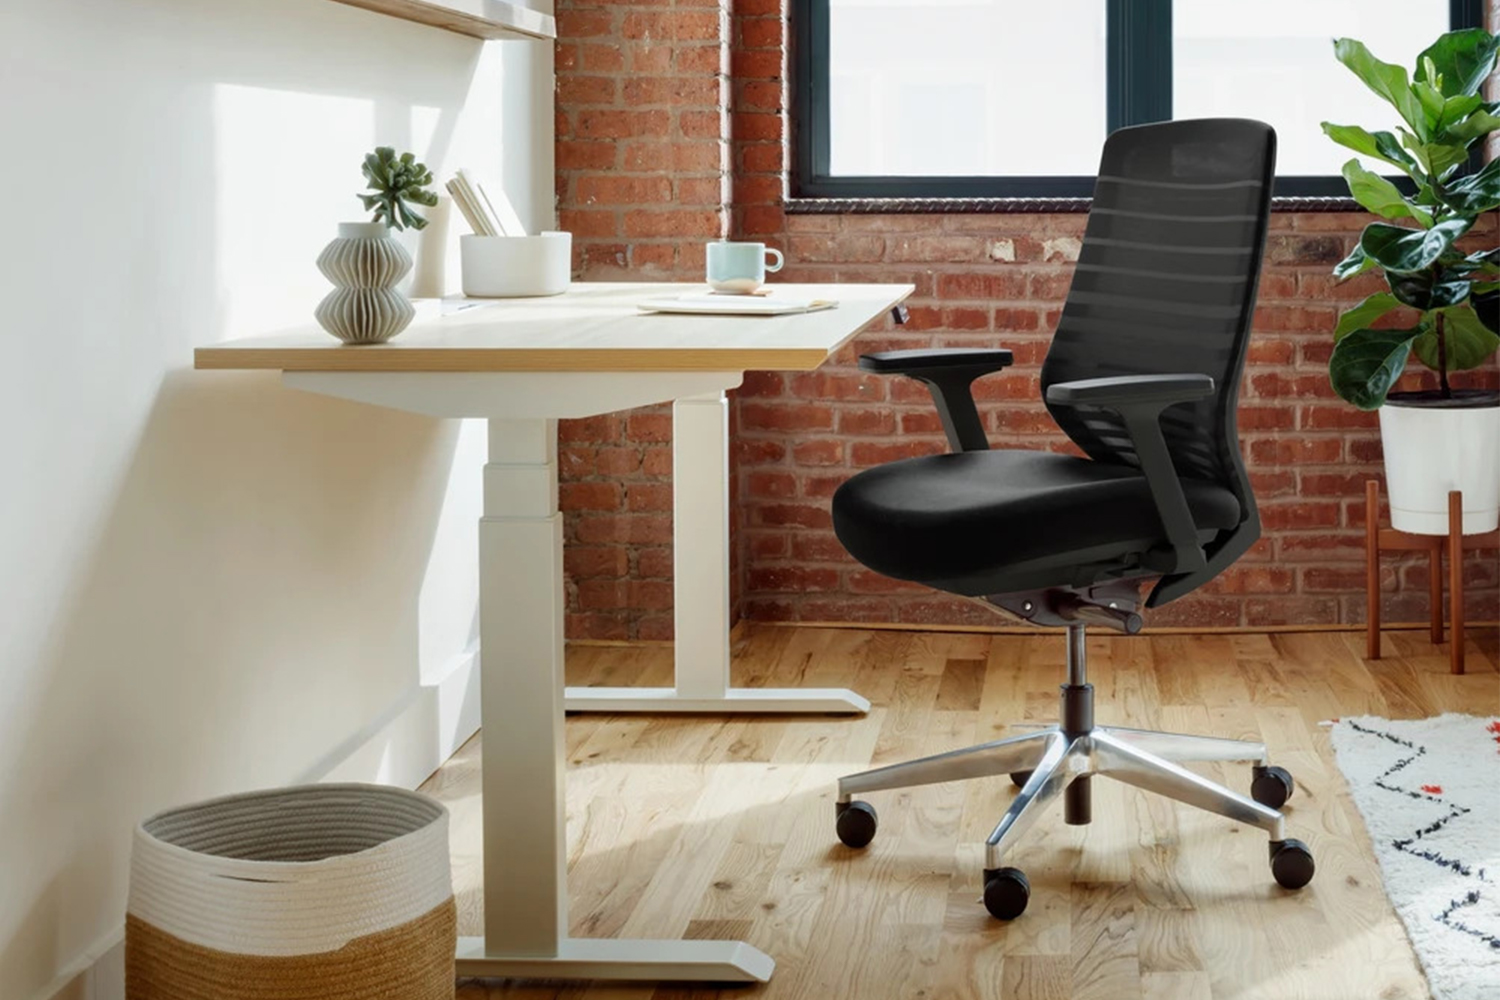 An ergonomic office chair and work desk from furniture company Branch